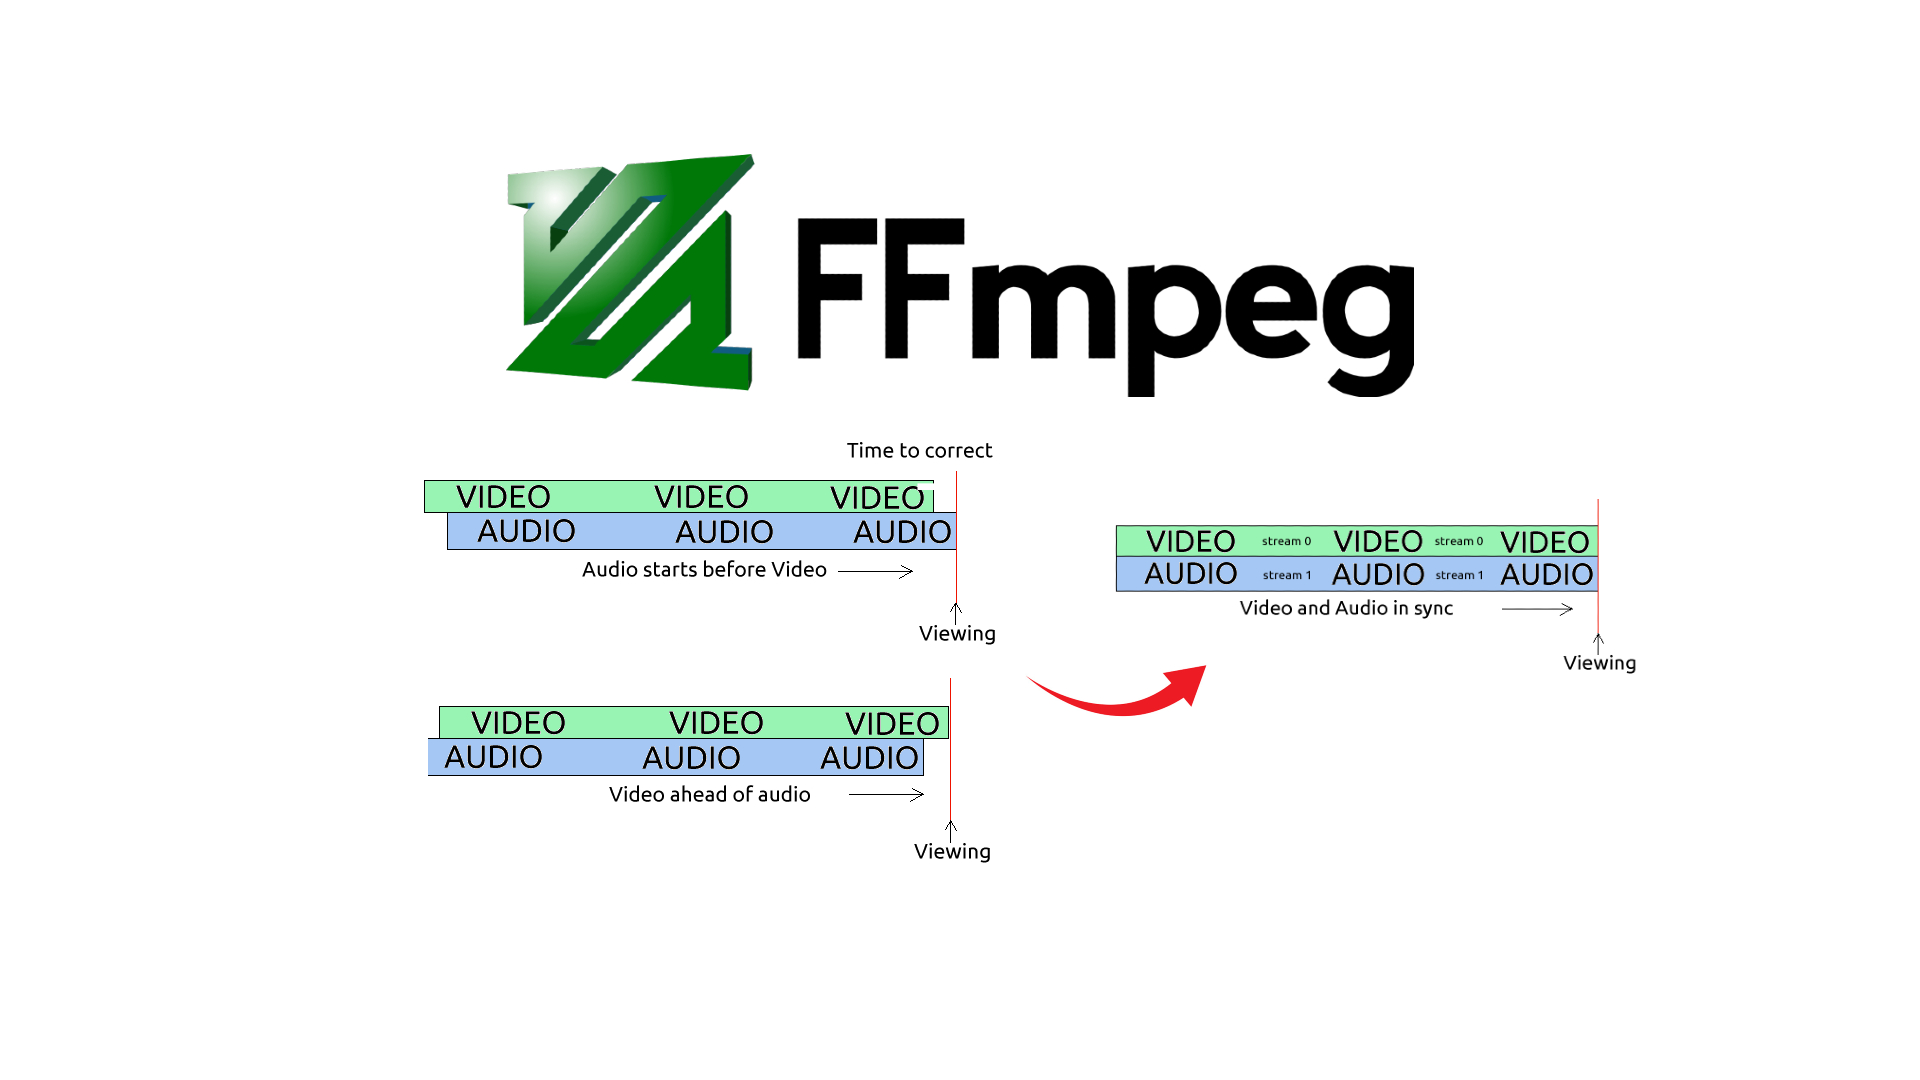 Synchronize audio and video with FFmpeg